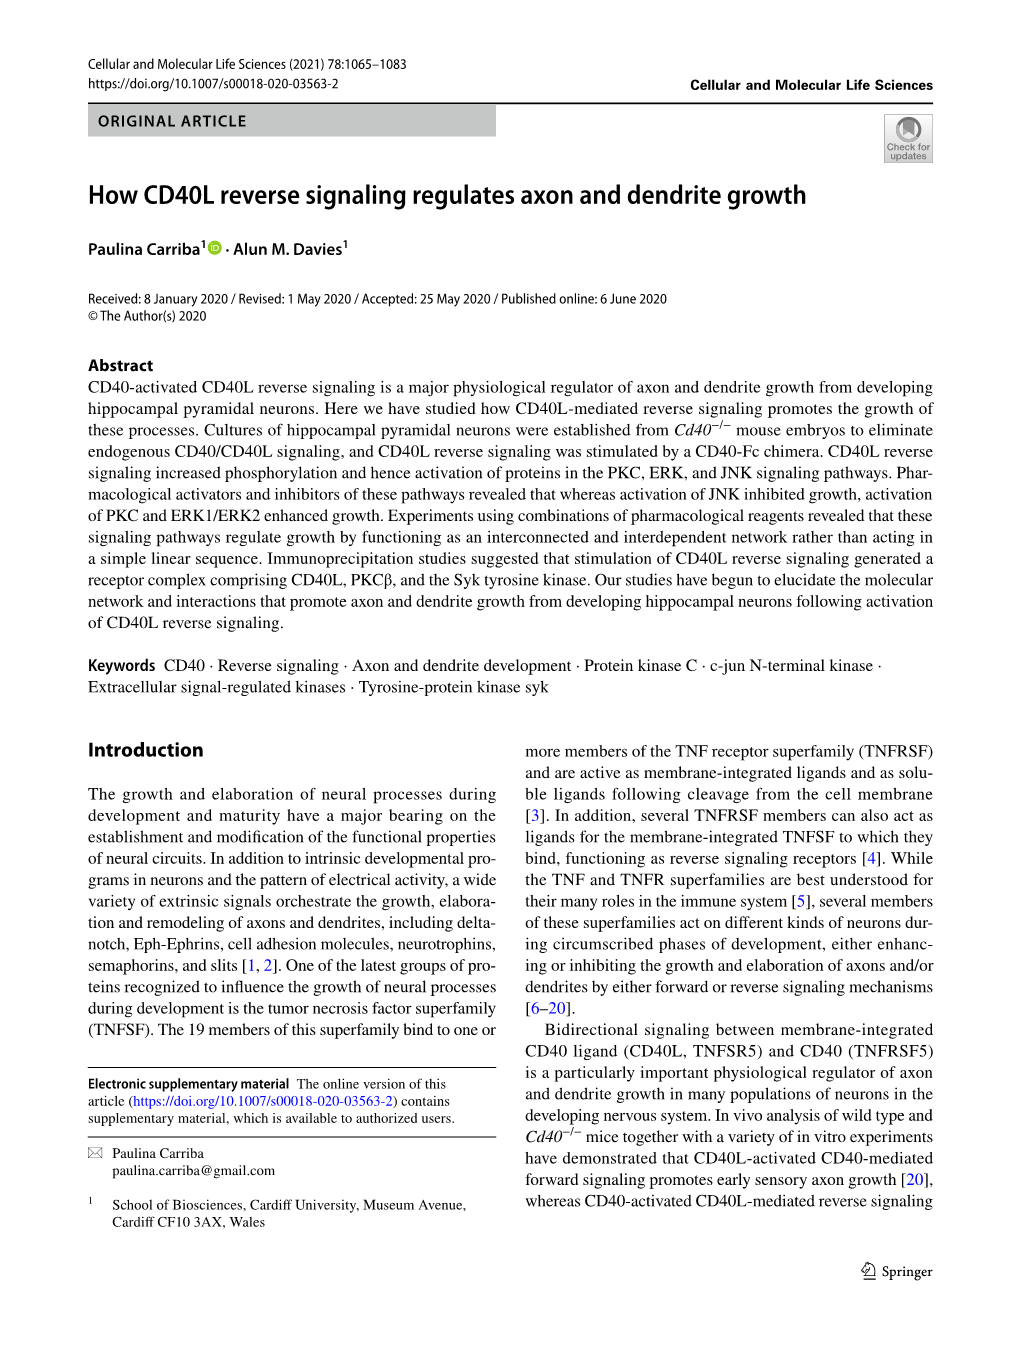 How CD40L Reverse Signaling Regulates Axon and Dendrite Growth